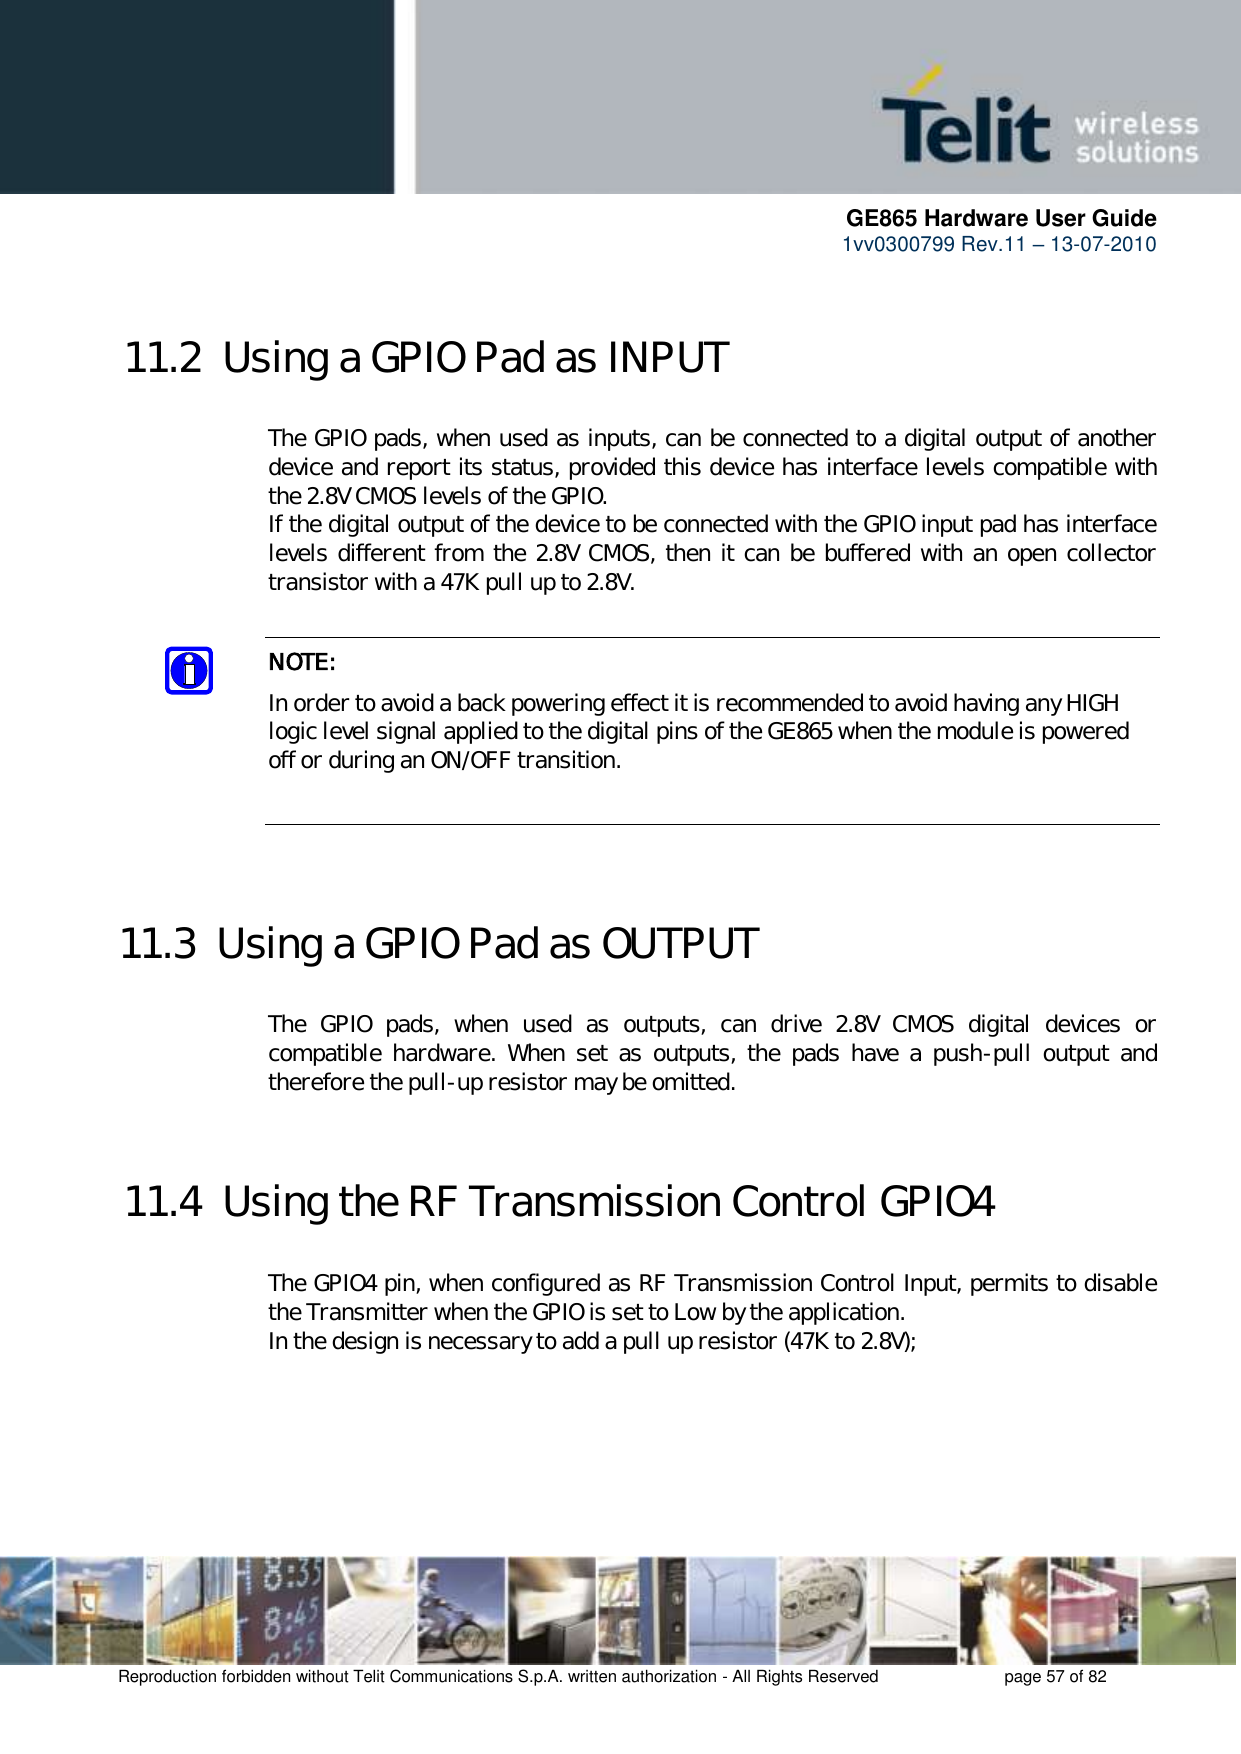      GE865 Hardware User Guide 1vv0300799 Rev.11 – 13-07-2010       Reproduction forbidden without Telit Communications S.p.A. written authorization - All Rights Reserved    page 57 of 82  11.2  Using a GPIO Pad as INPUT  The GPIO pads, when used as inputs, can be connected to a digital output of another device and report its status, provided this device has interface levels compatible with the 2.8V CMOS levels of the GPIO.  If the digital output of the device to be connected with the GPIO input pad has interface levels different from the 2.8V CMOS, then it can be buffered with an open collector transistor with a 47K pull up to 2.8V.  NOTE: In order to avoid a back powering effect it is recommended to avoid having any HIGH logic level signal applied to the digital pins of the GE865 when the module is powered off or during an ON/OFF transition.   11.3  Using a GPIO Pad as OUTPUT  The  GPIO  pads,  when  used  as  outputs,  can  drive  2.8V  CMOS  digital  devices  or compatible  hardware.  When  set  as  outputs,  the  pads have  a  push-pull  output  and therefore the pull-up resistor may be omitted.  11.4  Using the RF Transmission Control GPIO4  The GPIO4 pin, when configured as RF Transmission Control Input, permits to disable the Transmitter when the GPIO is set to Low by the application. In the design is necessary to add a pull up resistor (47K to 2.8V);   